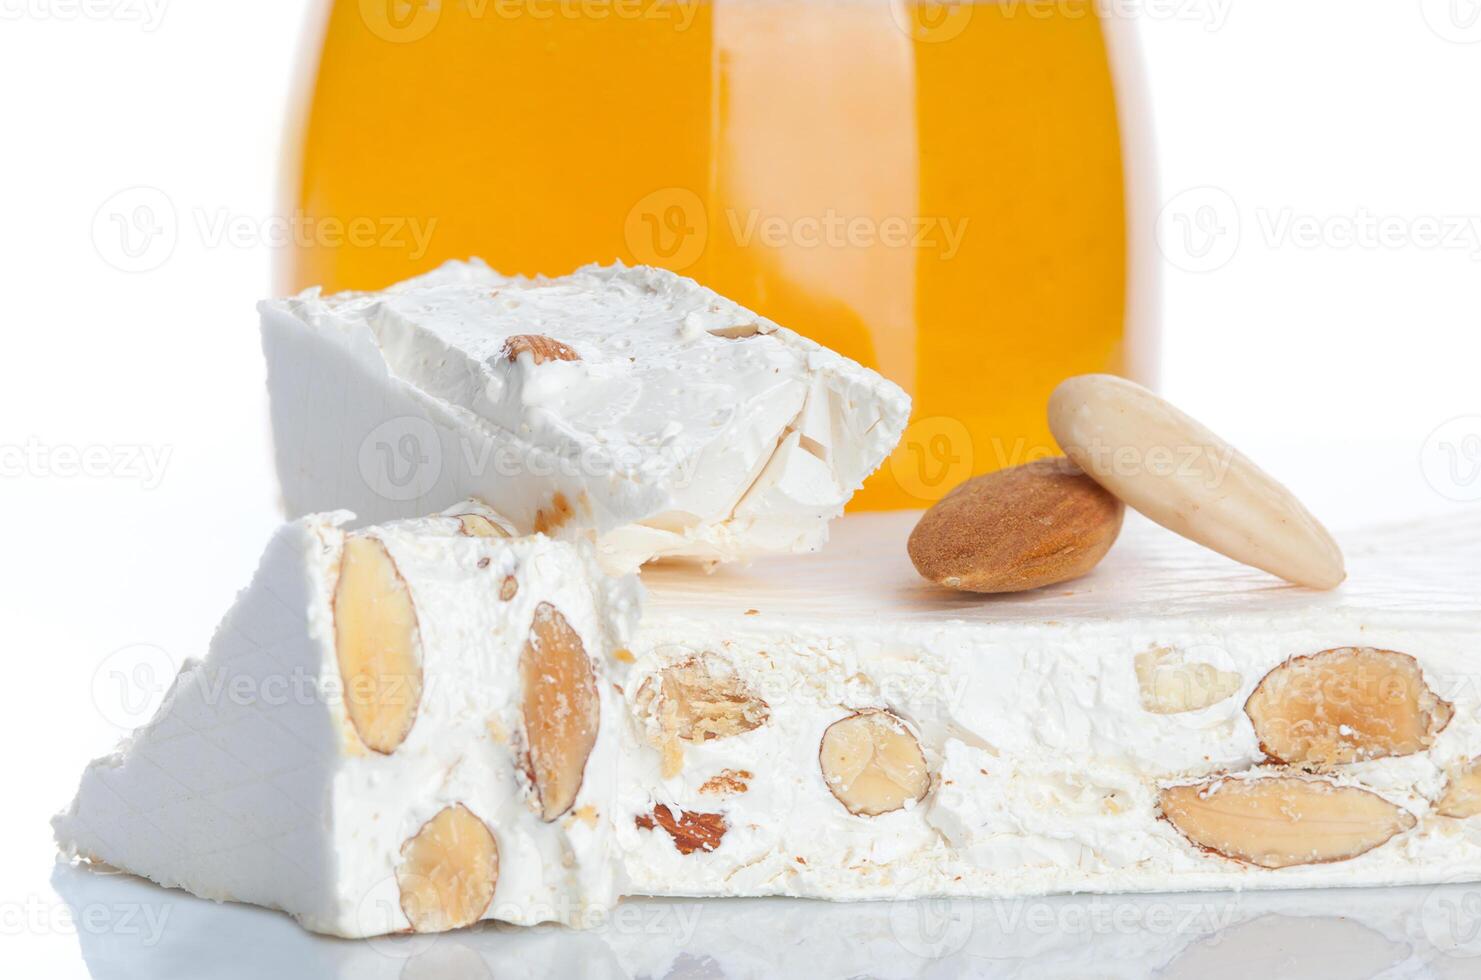 Sweet nougat with almonds photo